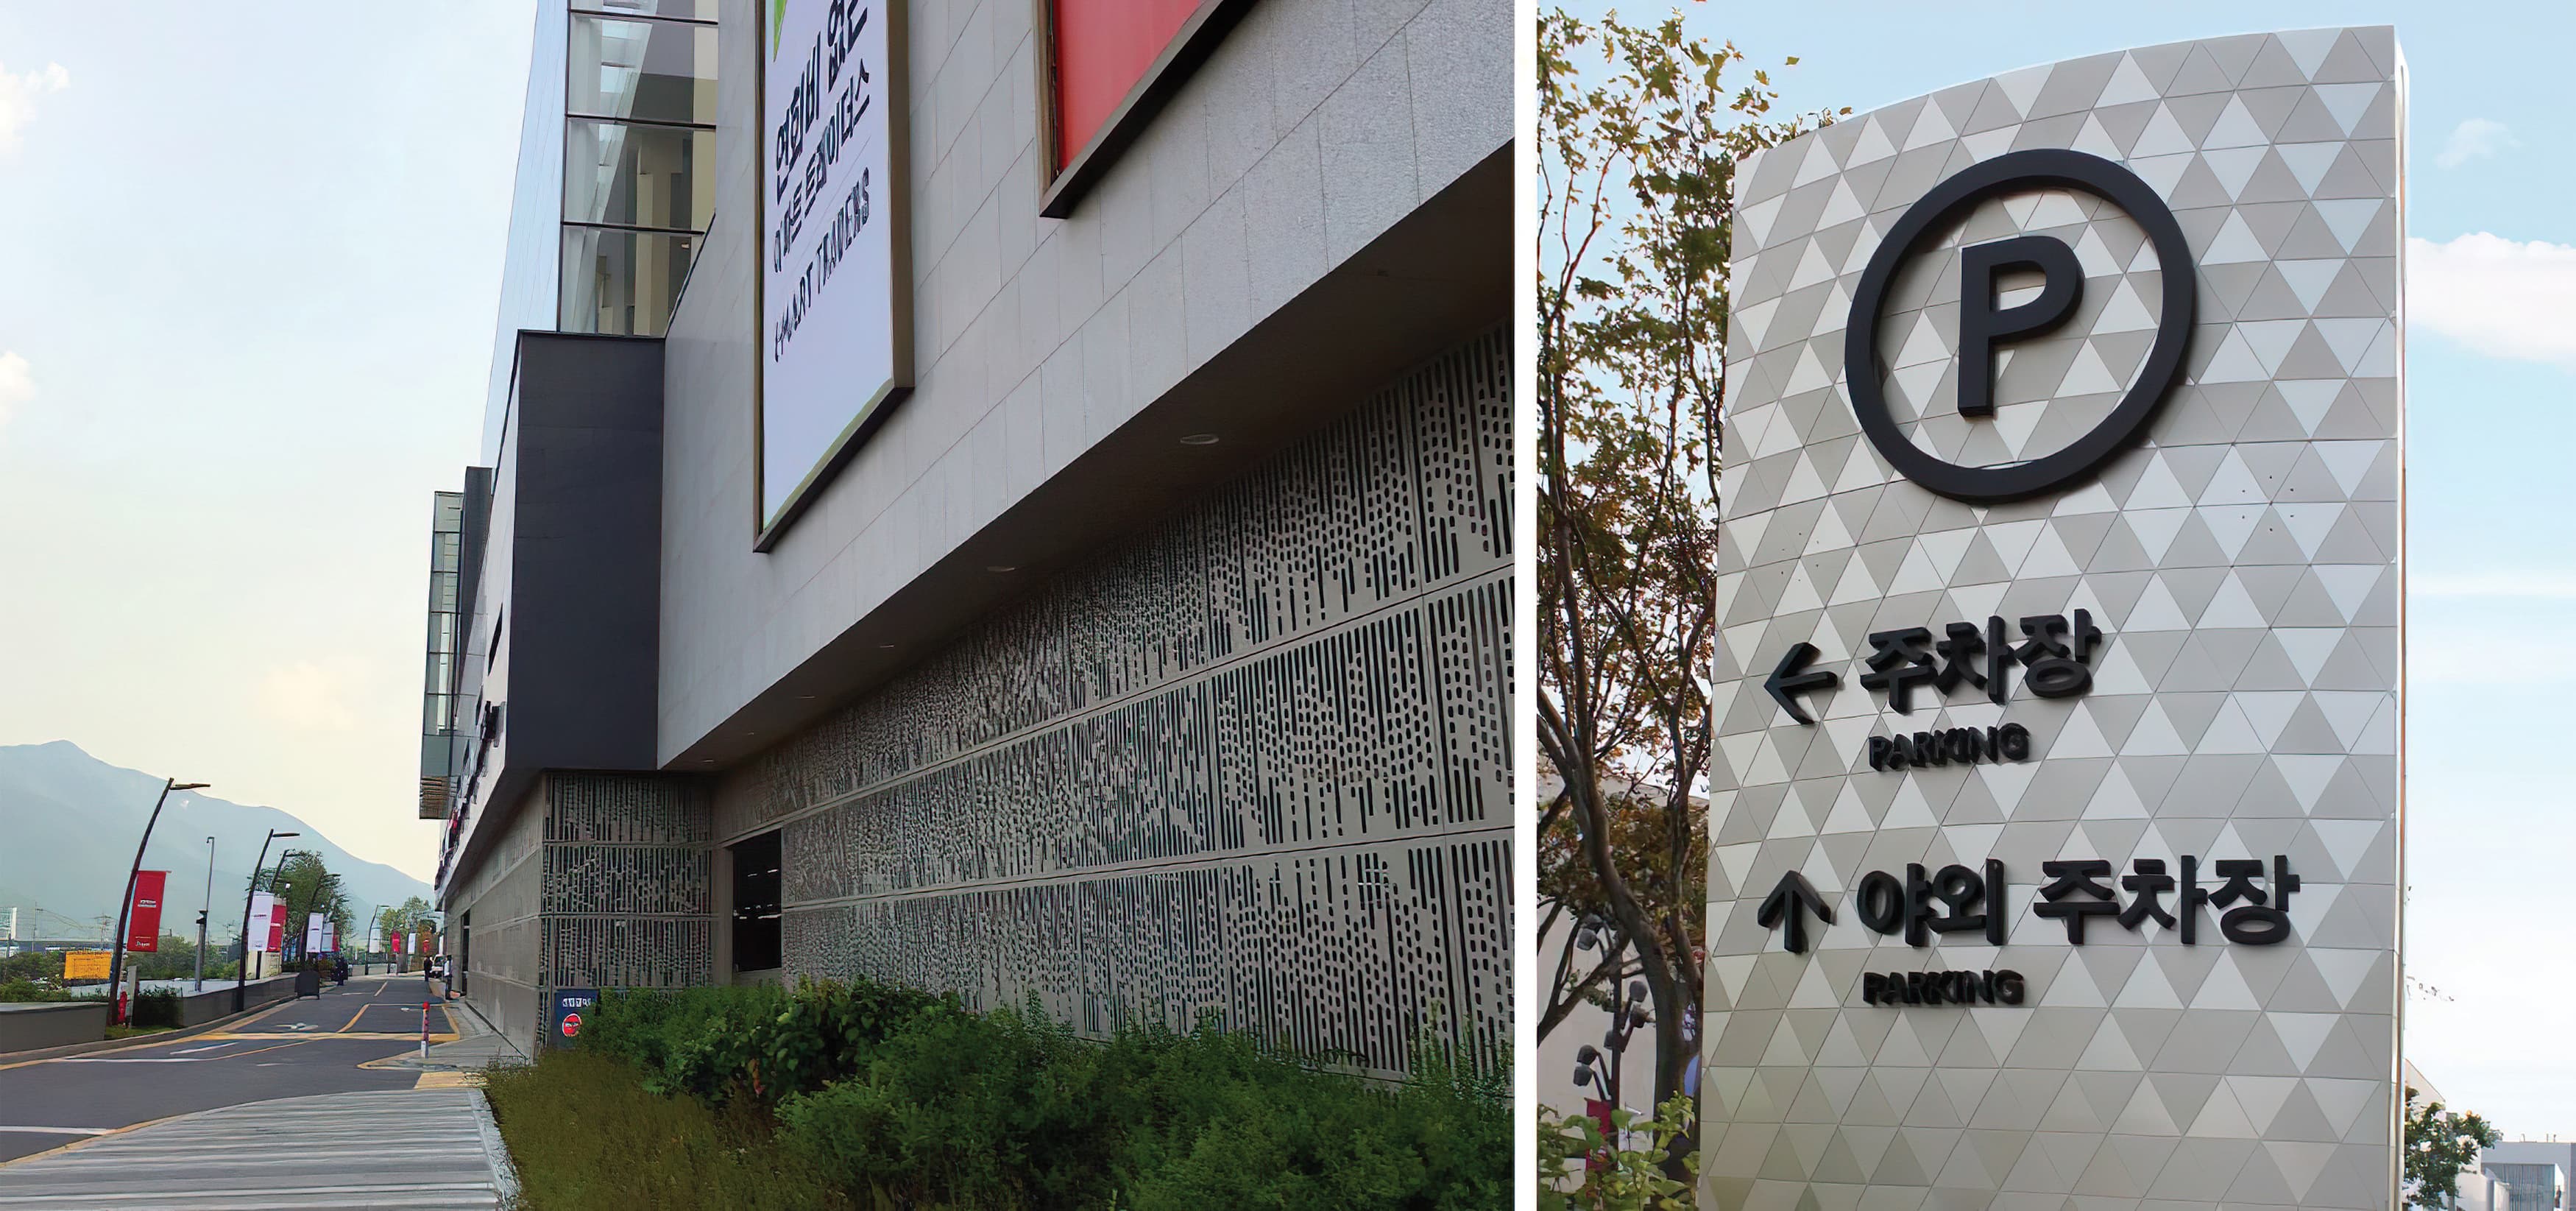 Starfield, a retail project in Hanam, South Korea. Parking Identity and Directional Signage